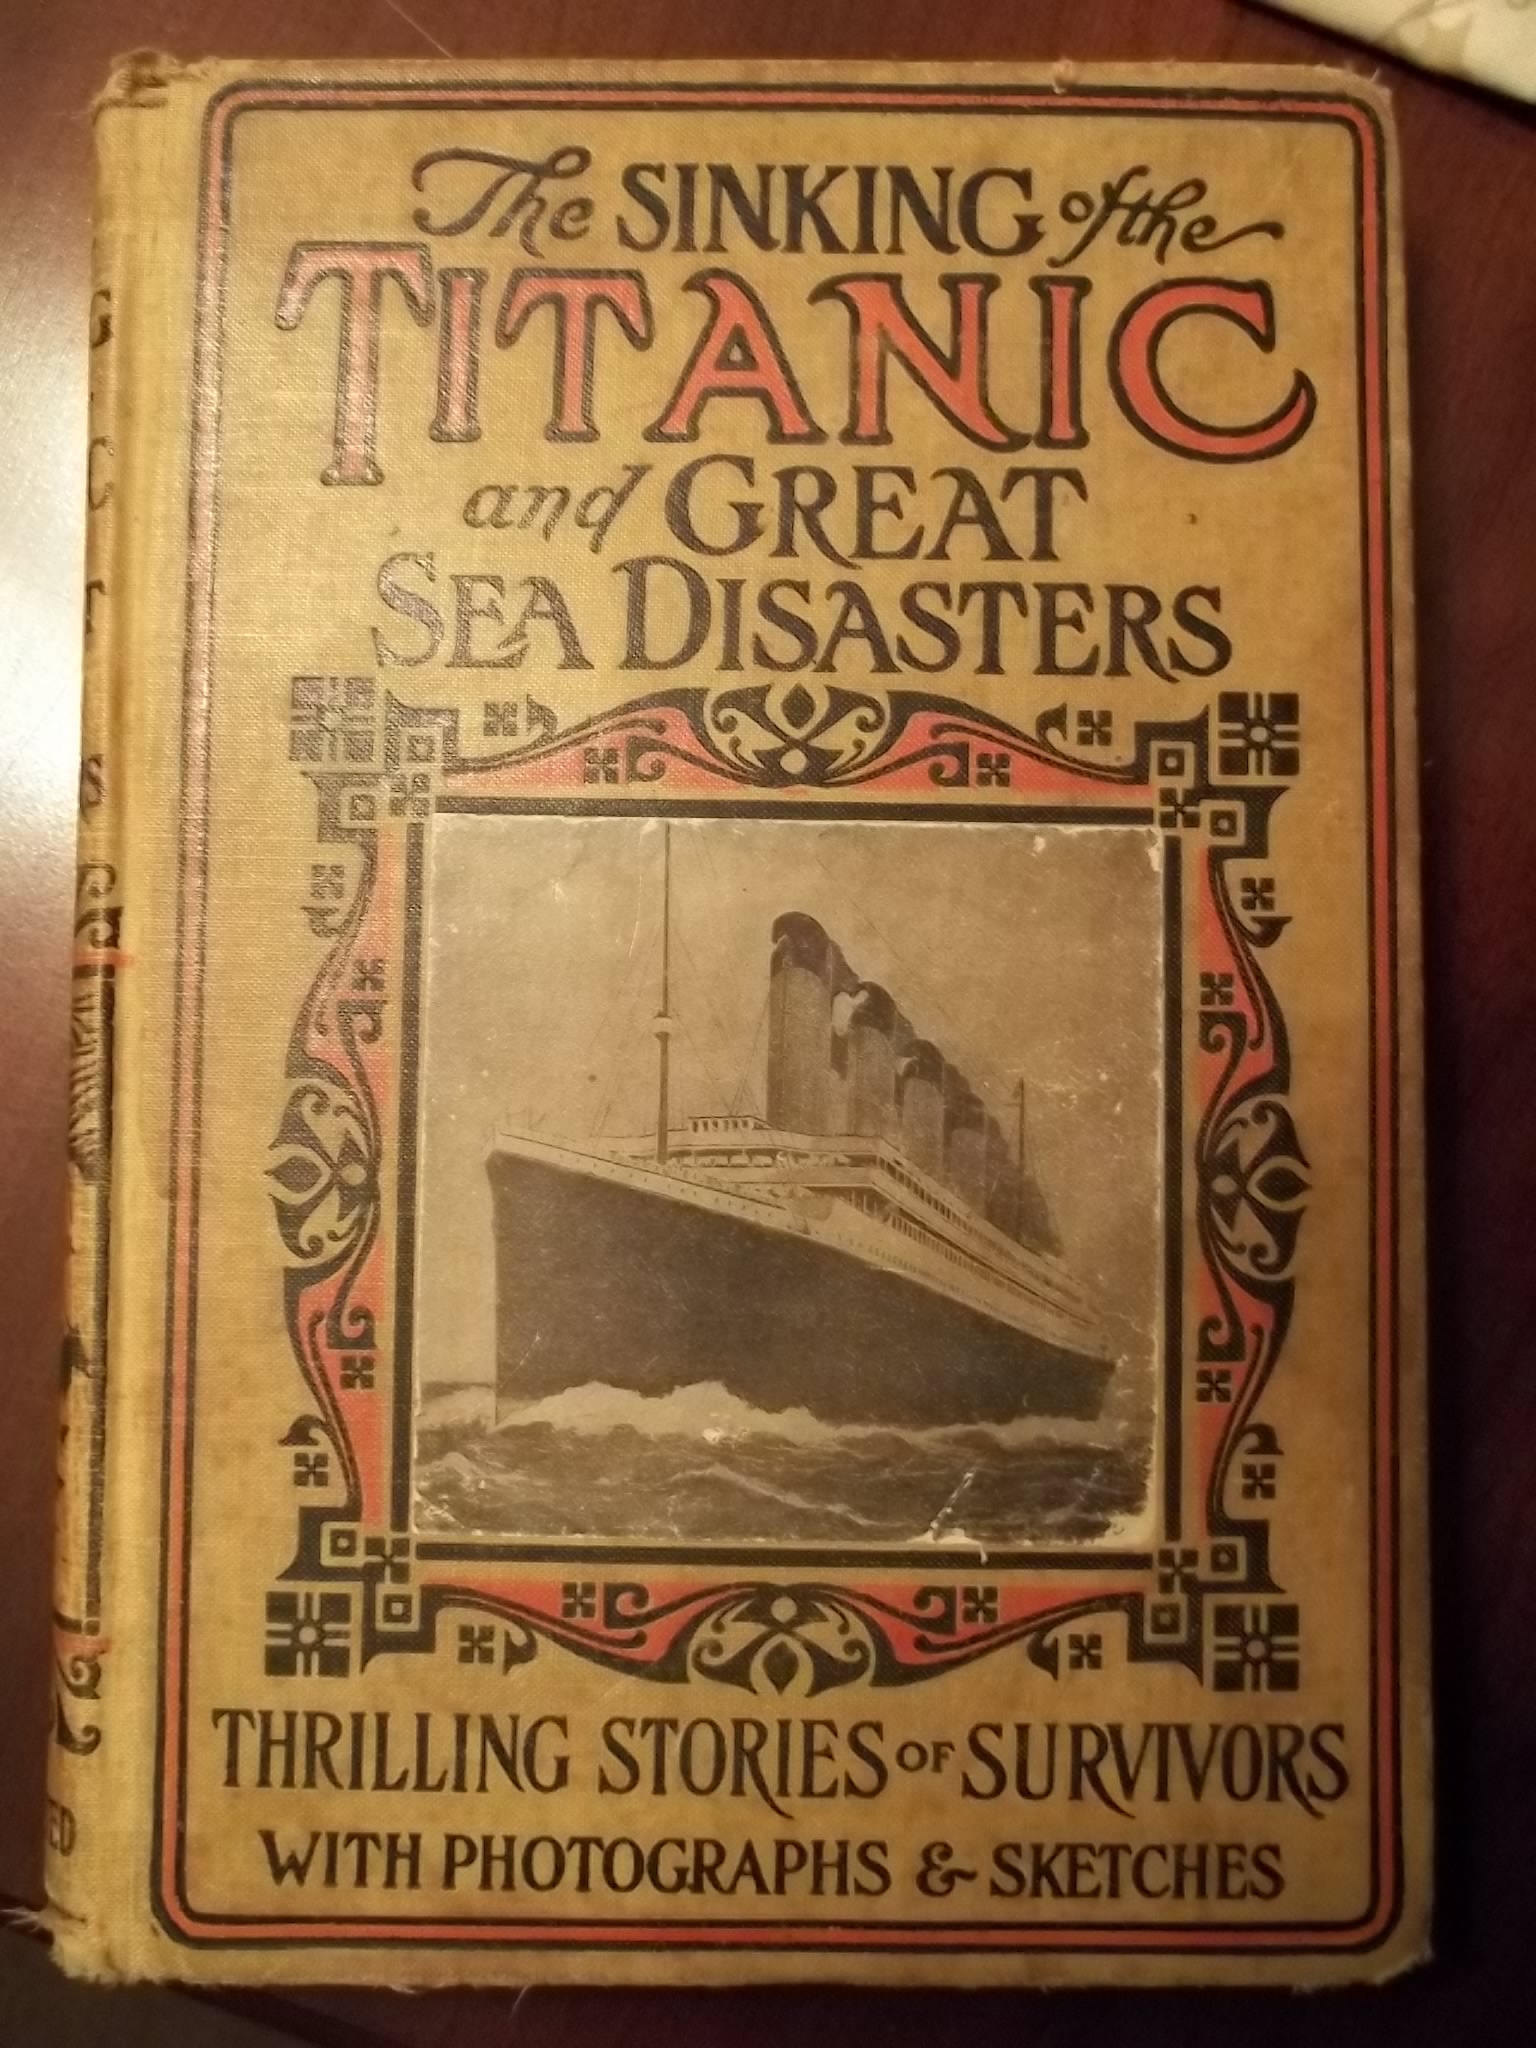 Titanic Book From 1912 By Fatthoron On Deviantart